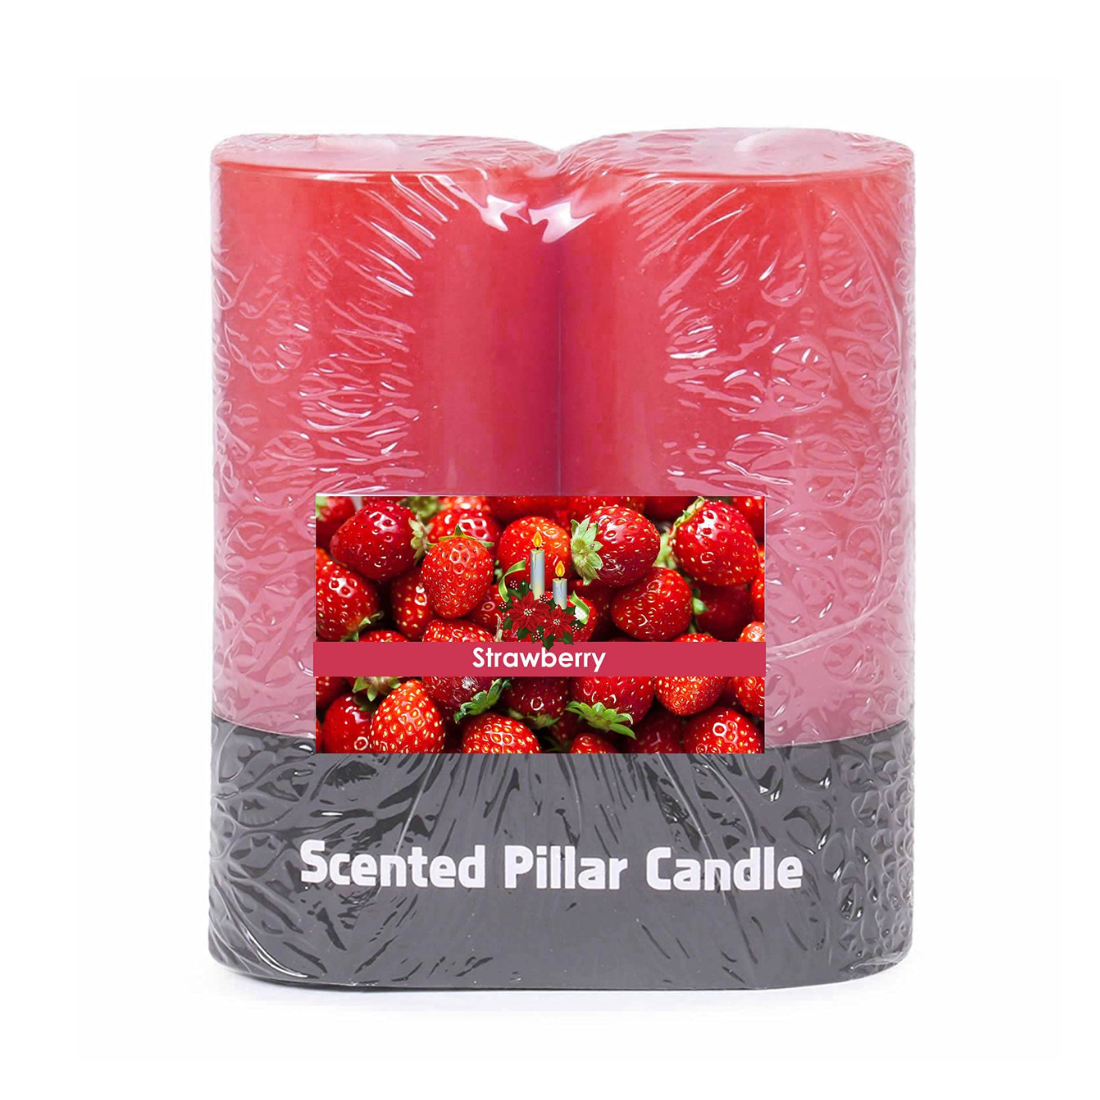 Strawberry Scented Pillar Candles